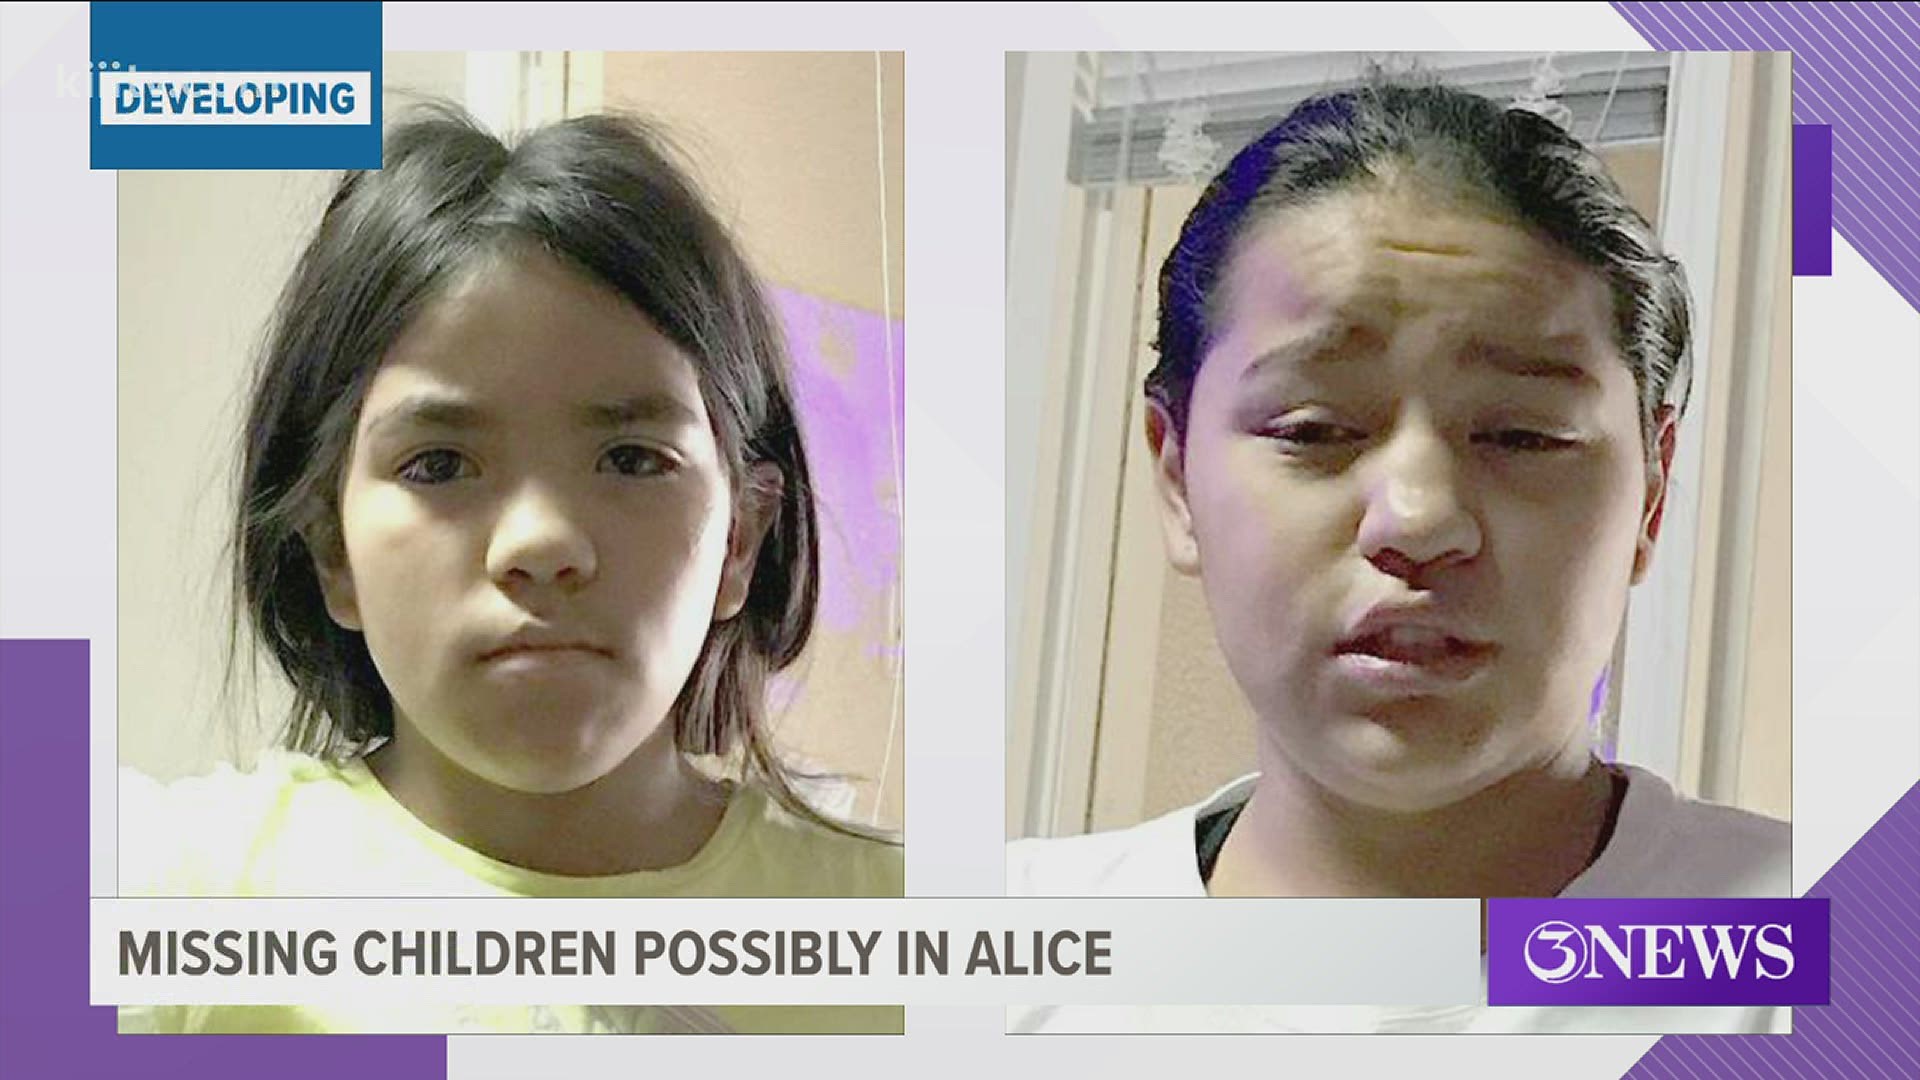 If you have any information regarding these two missing children, call 911 or contact the Lubbock Police Department at 1-806-775-2865.